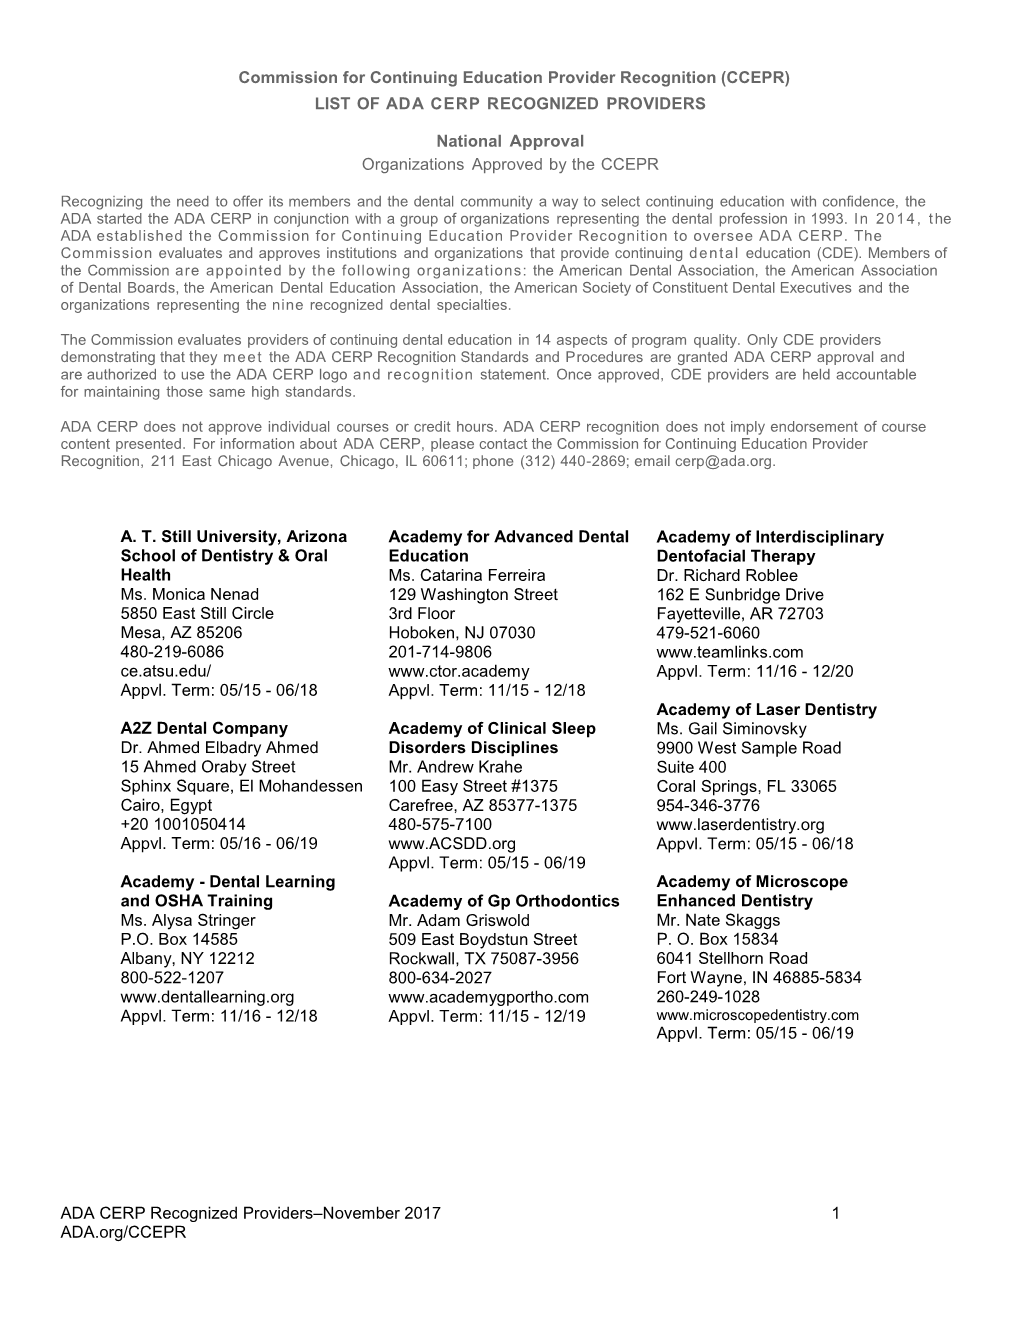 CCEPR.Org: List of ADA CERP Recognized Providers National